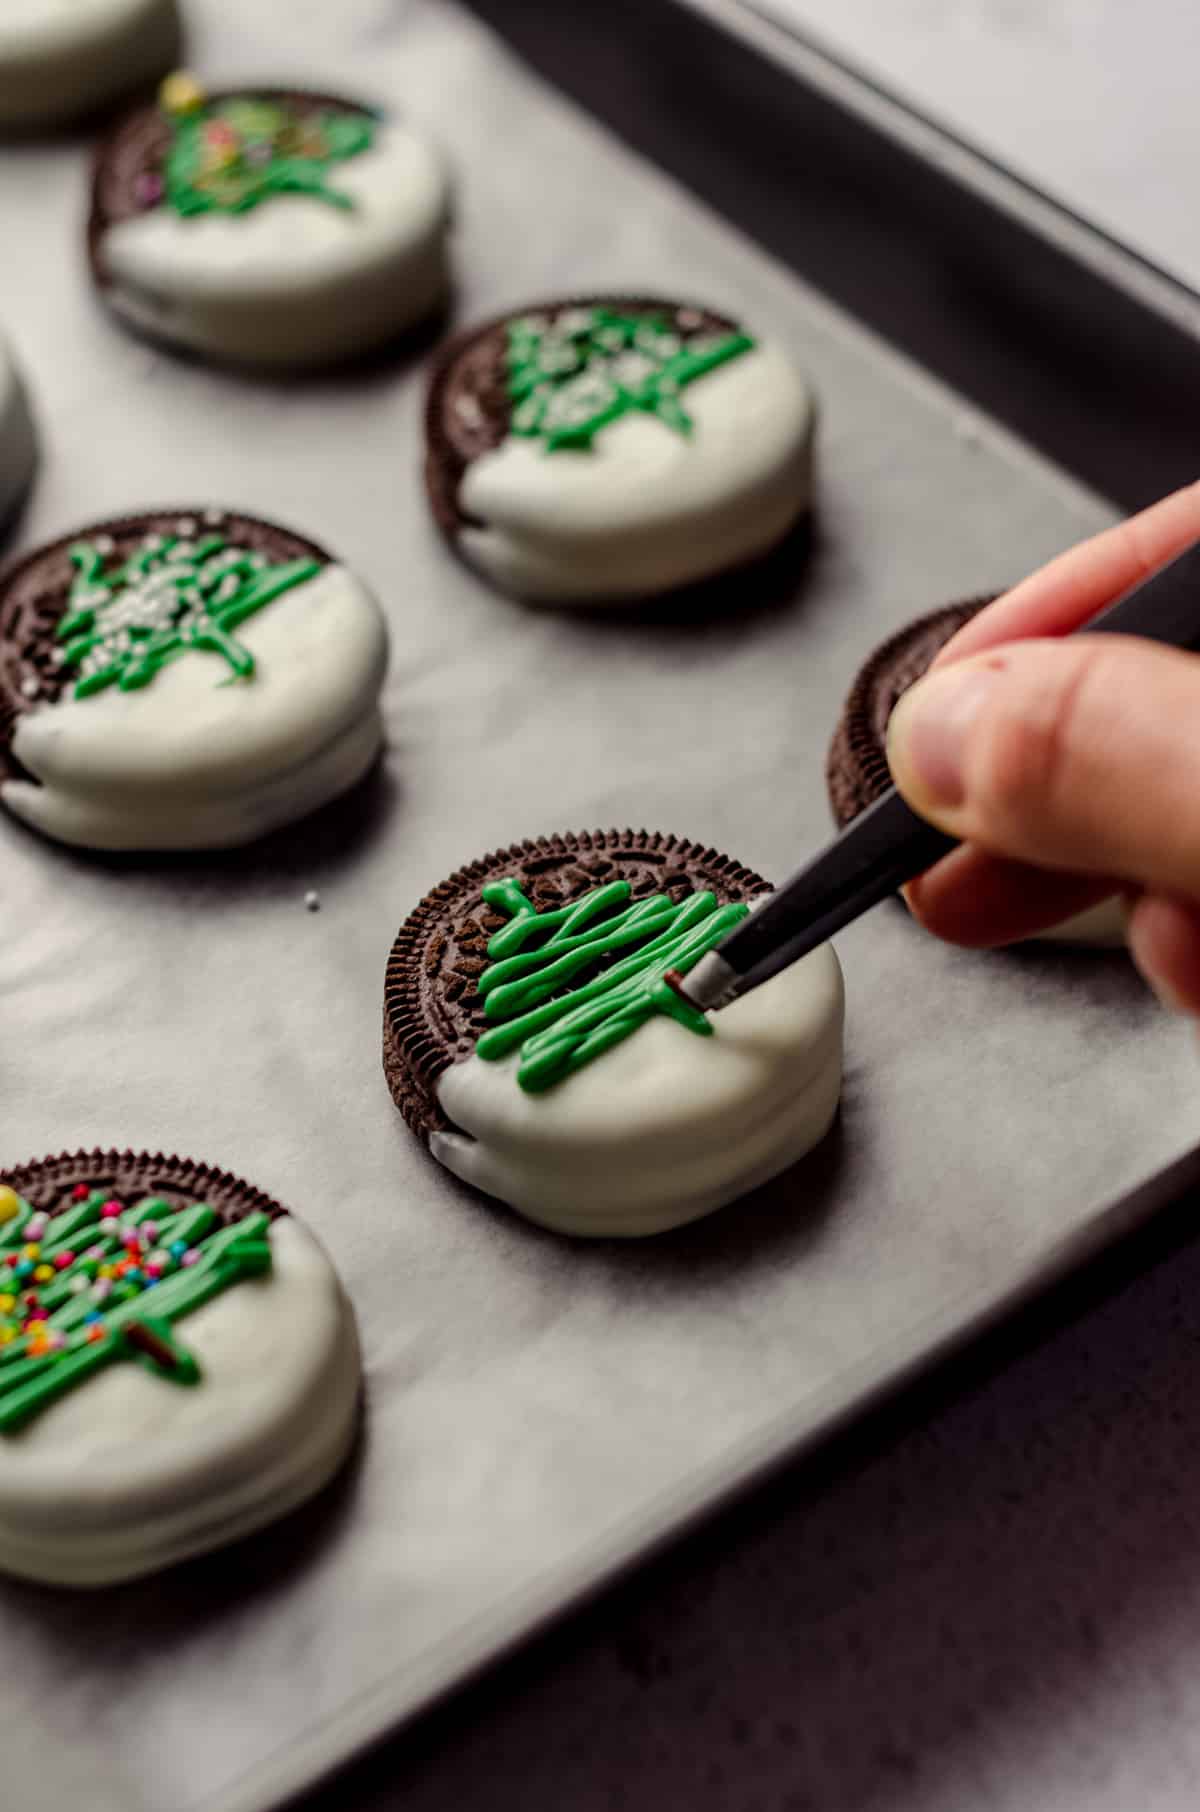 tweezers placing a chocolate jimmie onto a green christmas tree piped onto a white chocolate dipped oreo